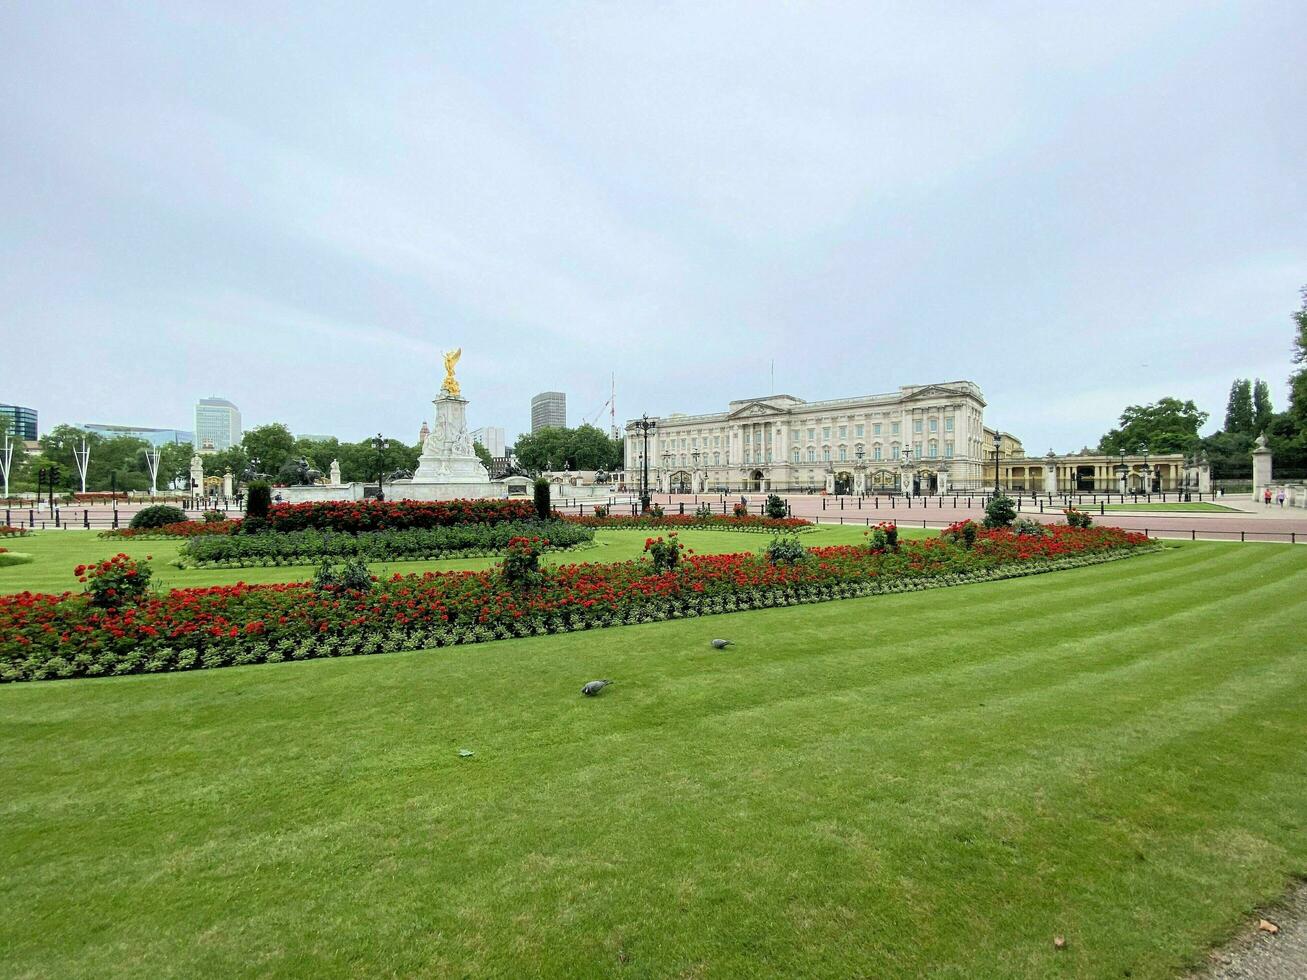 London in the UK on 10 July 2021. A view of Buckingham Palace photo